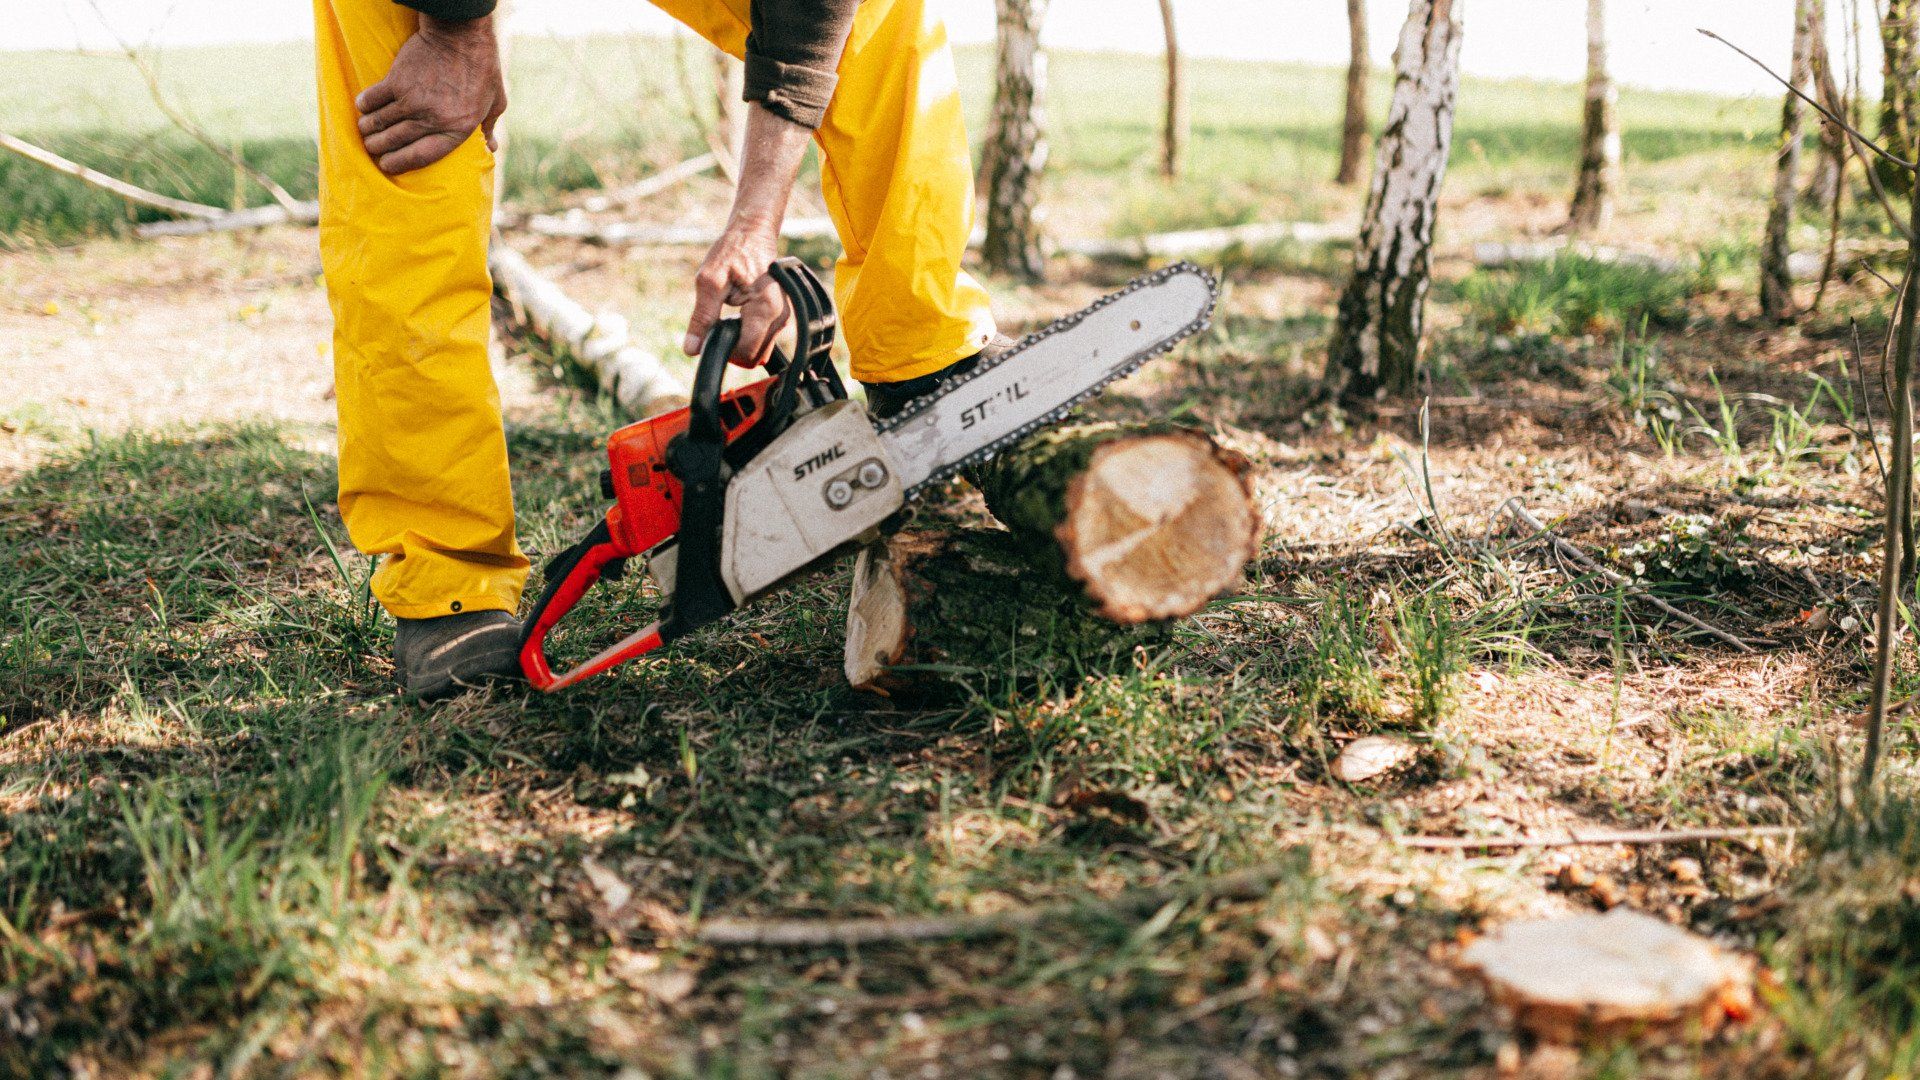 Providing comprehensive tree care tailored for commercial landscapes, our certified arborists are experts in maintaining tree health and safety while ensuring compliance with local regulations. We prioritize the aesthetic and environmental standards of your commercial property.